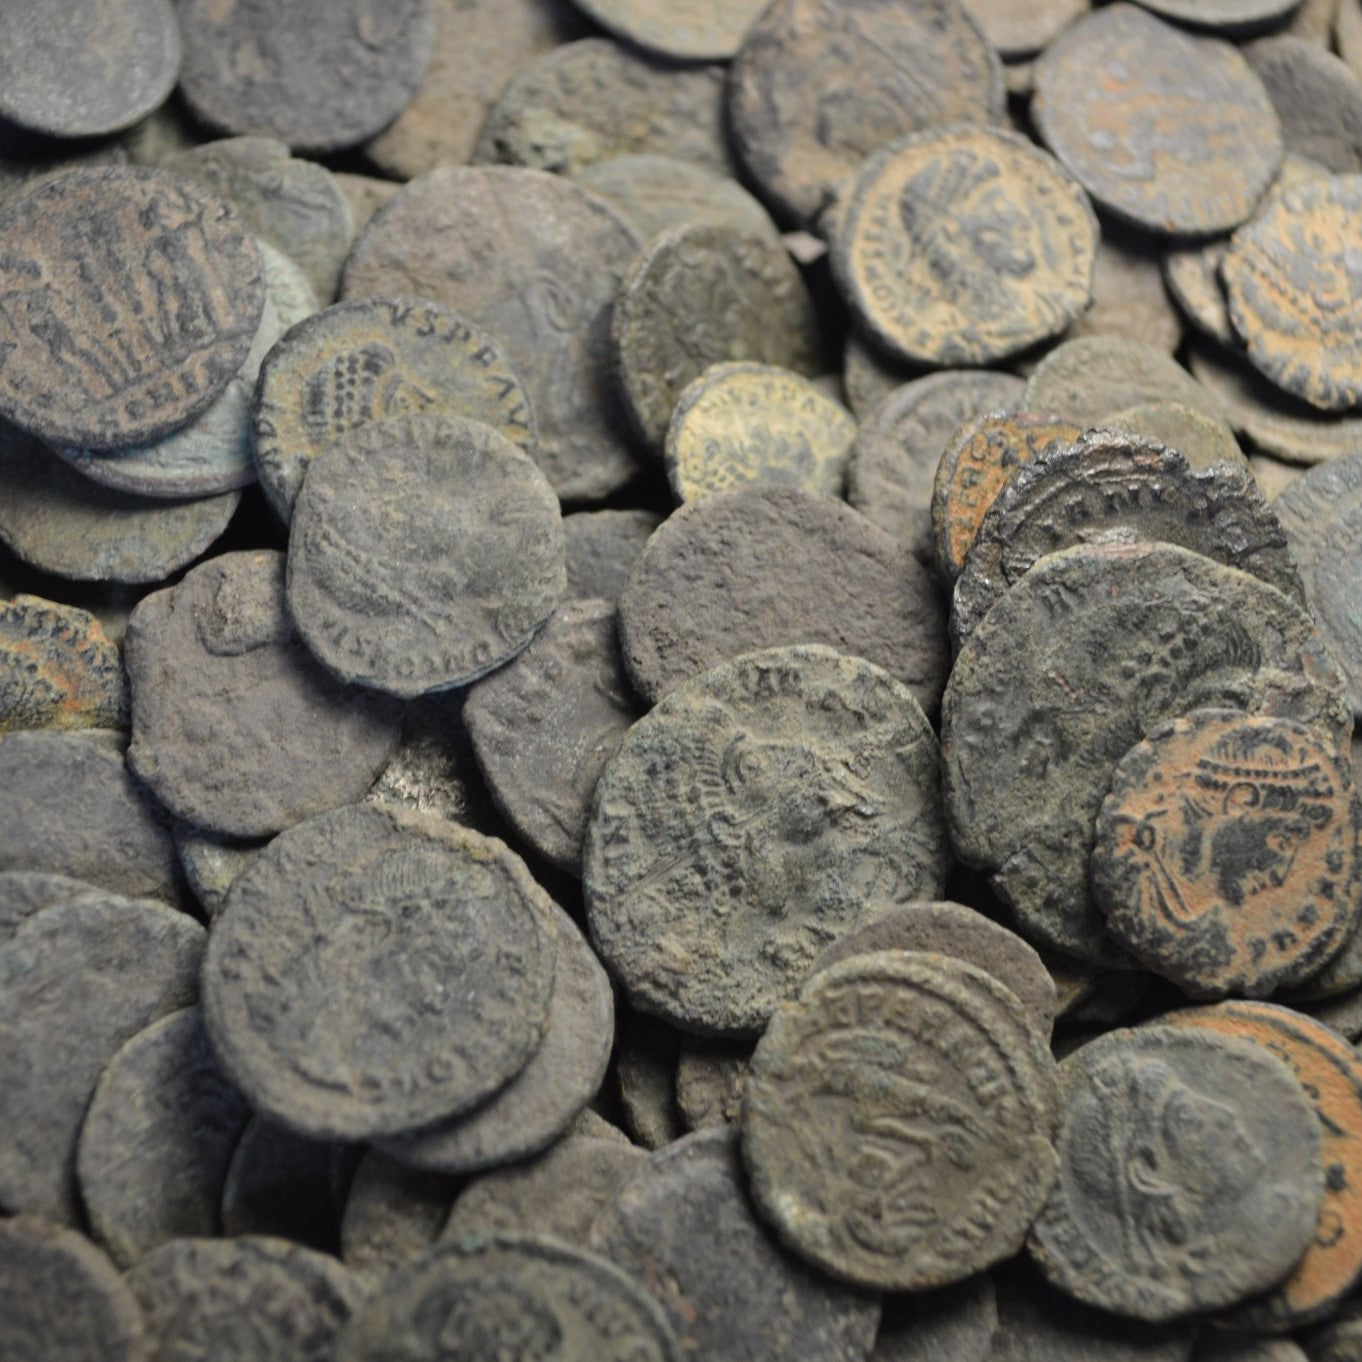 10 Uncleaned Ancient ROMAN BRONZE COINS. Genuine! 1600+ YEARS OLD - Detail Guaranteed